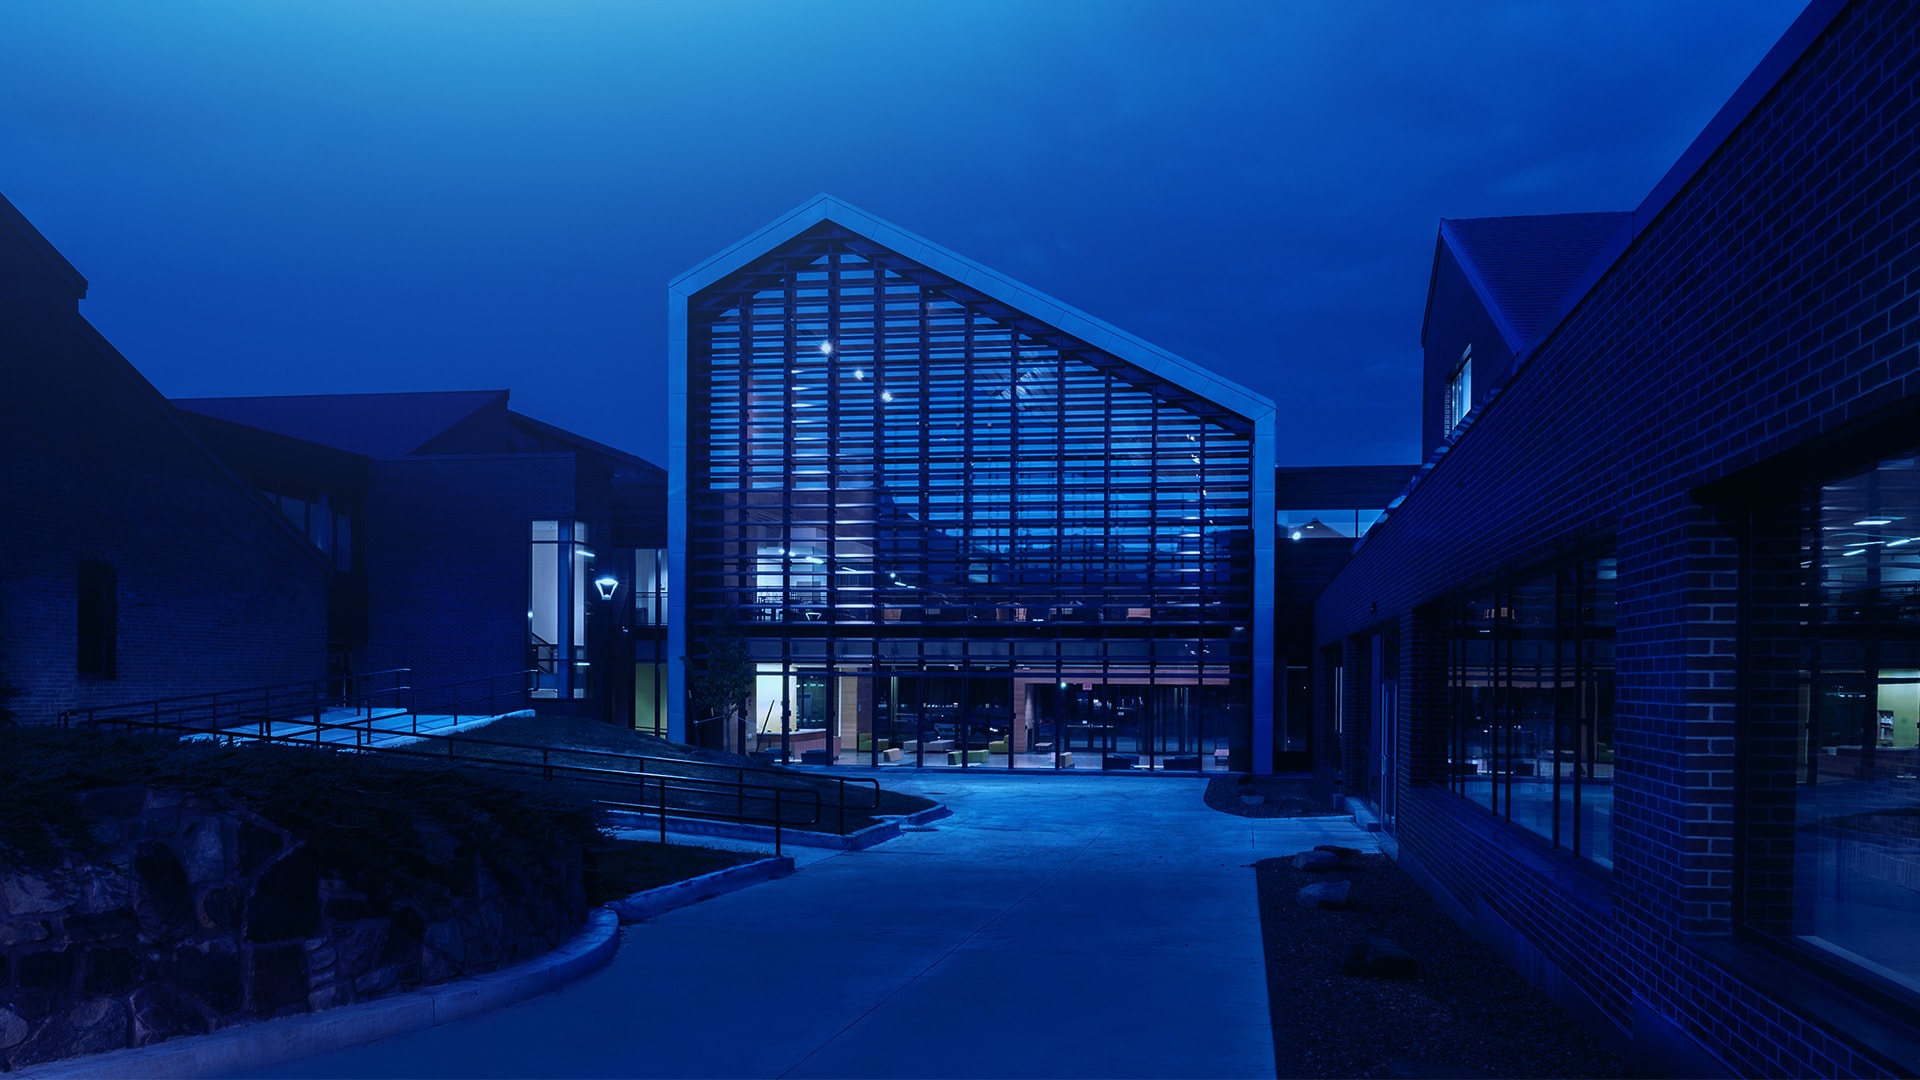 night time exterior of college in blue light